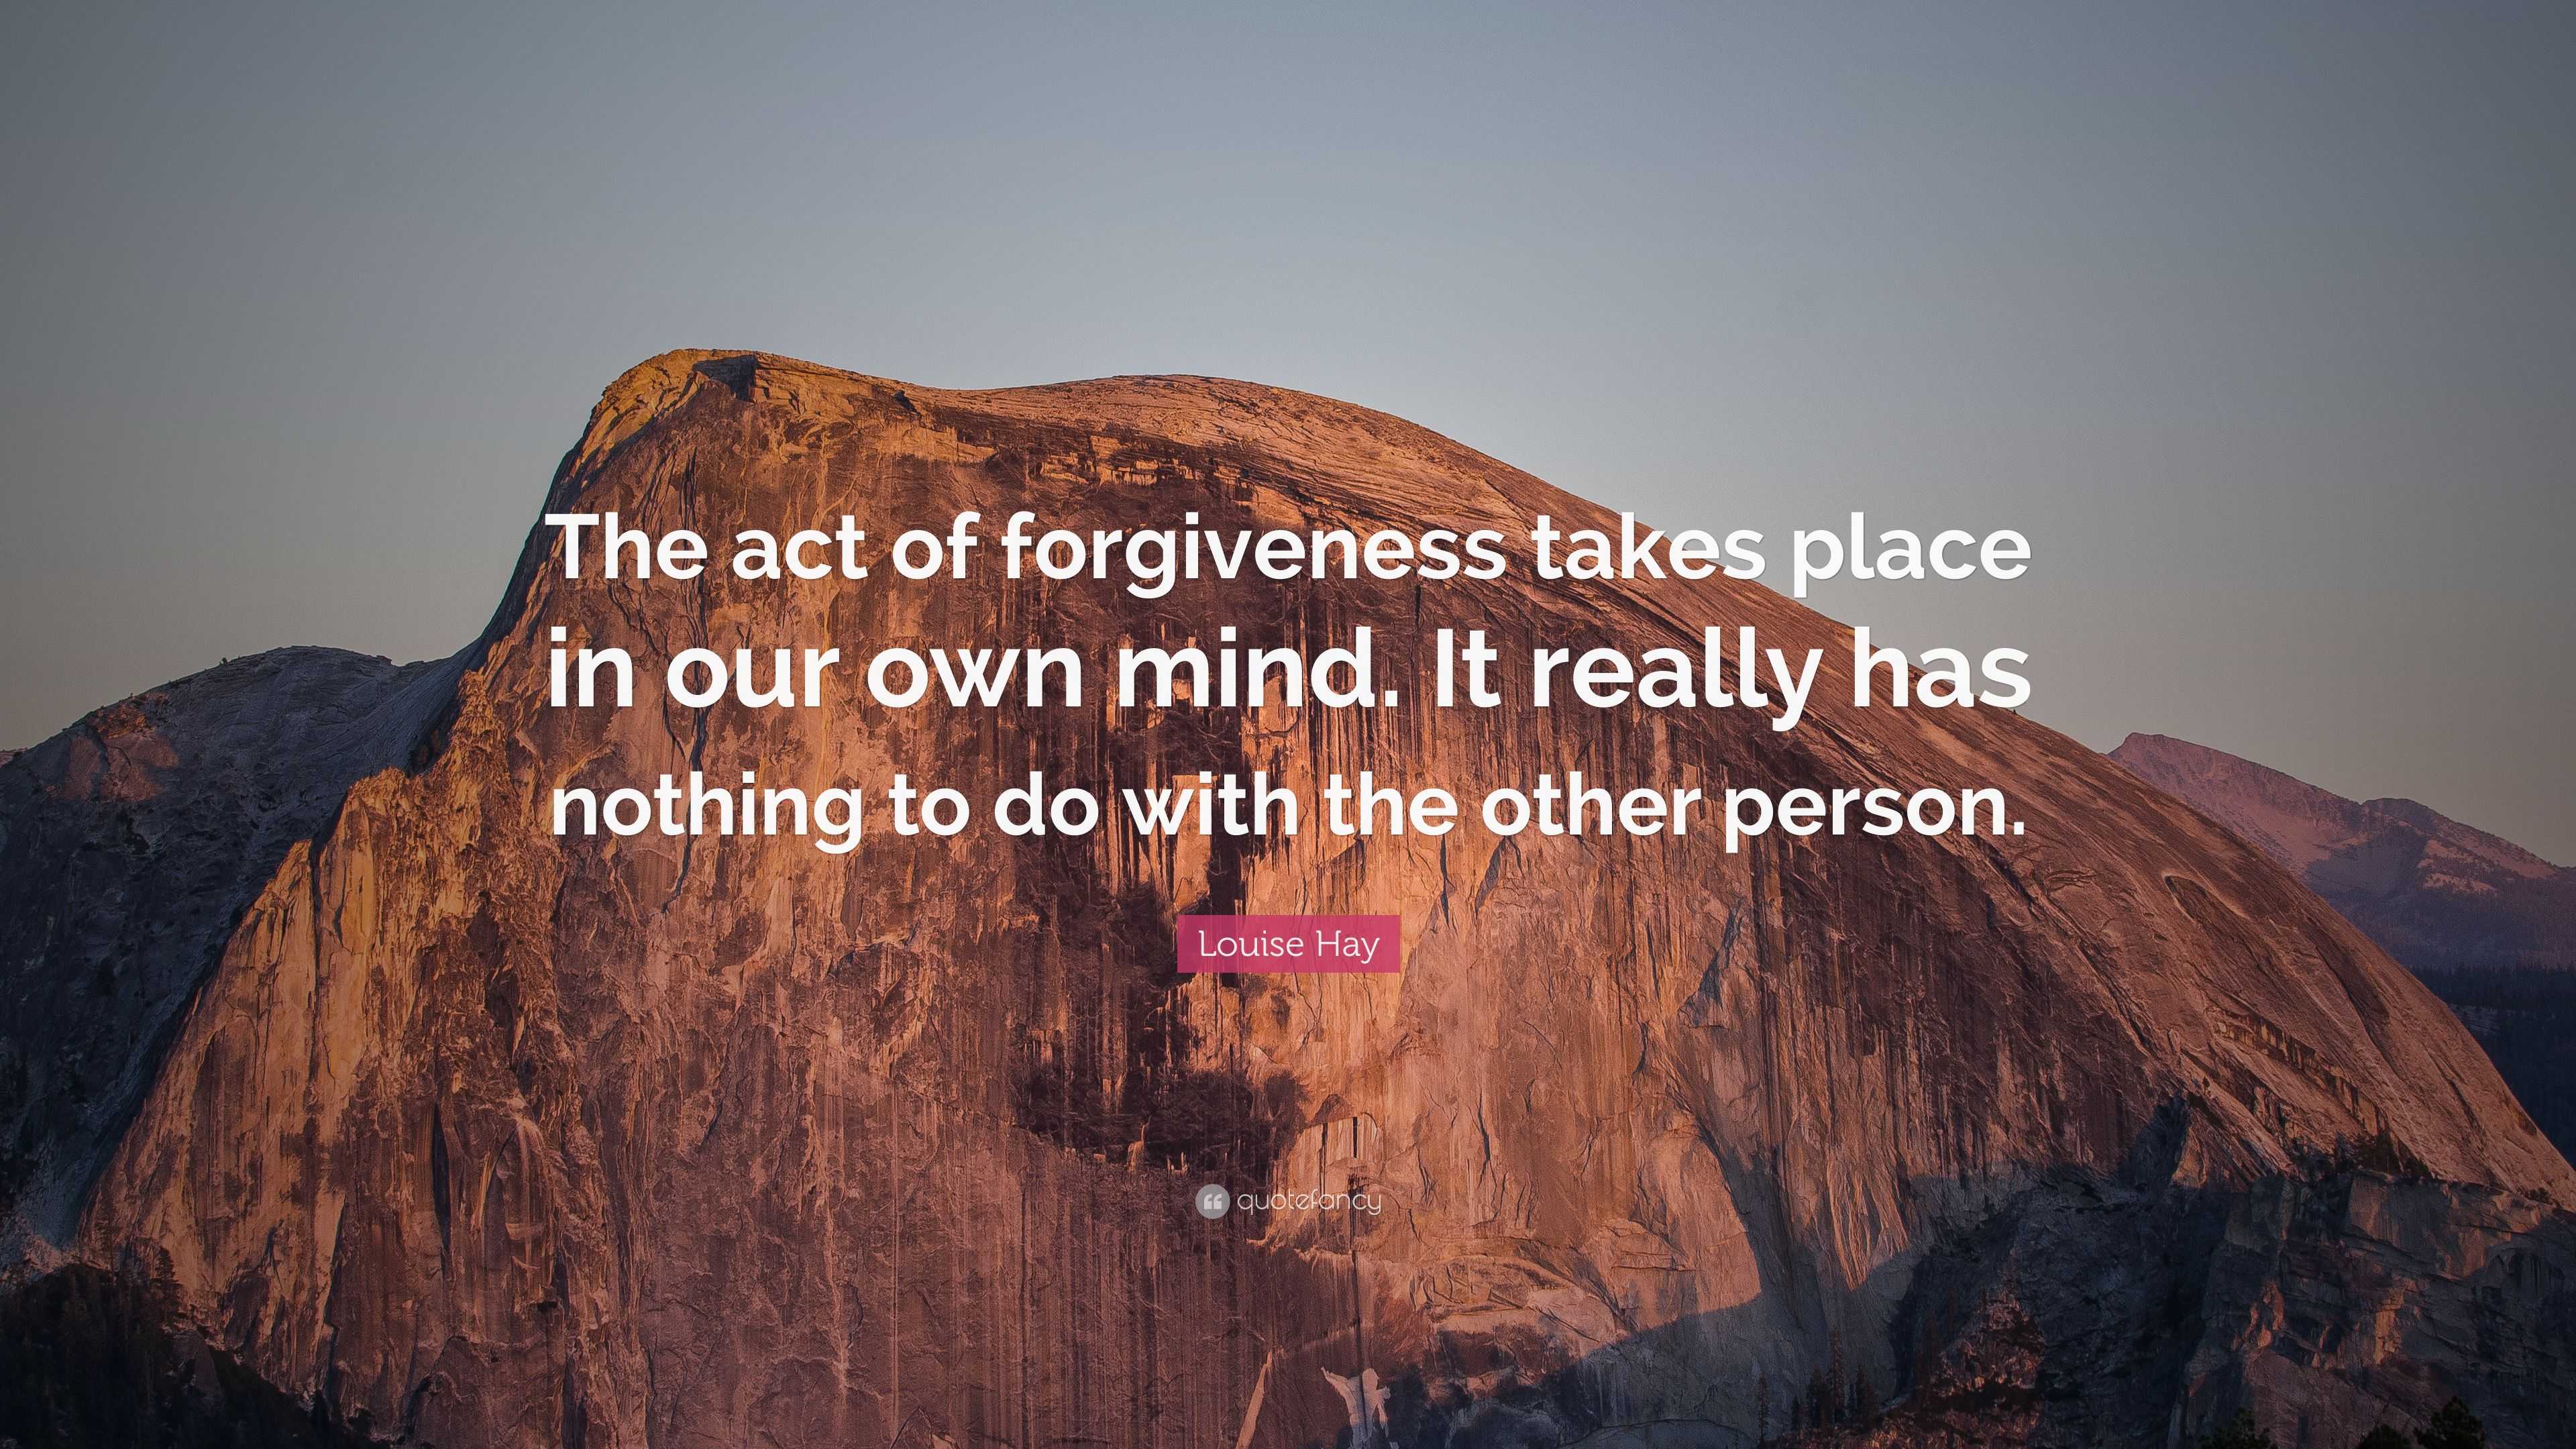 Louise Hay Quote: “The act of forgiveness takes place in our own mind. It really has nothing to ...